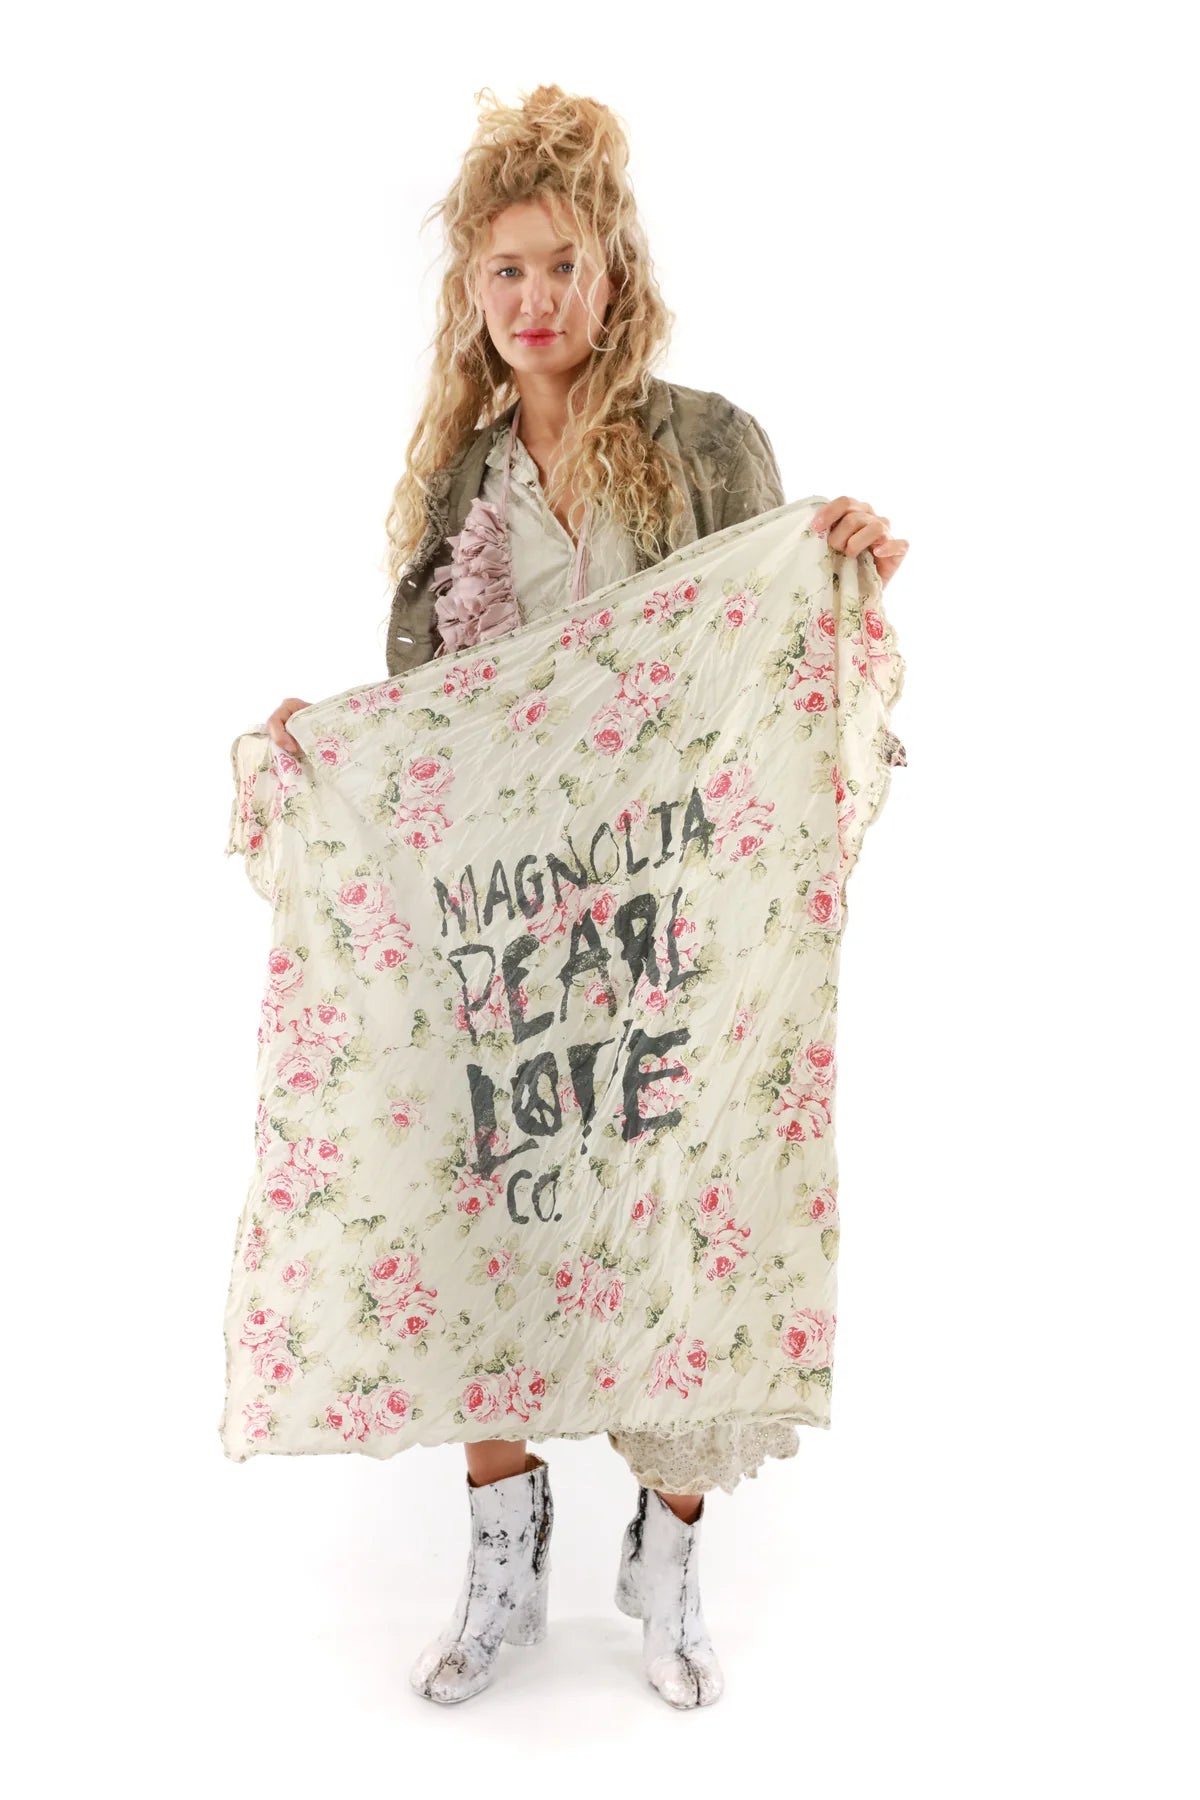 MP Love Co. Floral Scarf by Magnolia Pearl